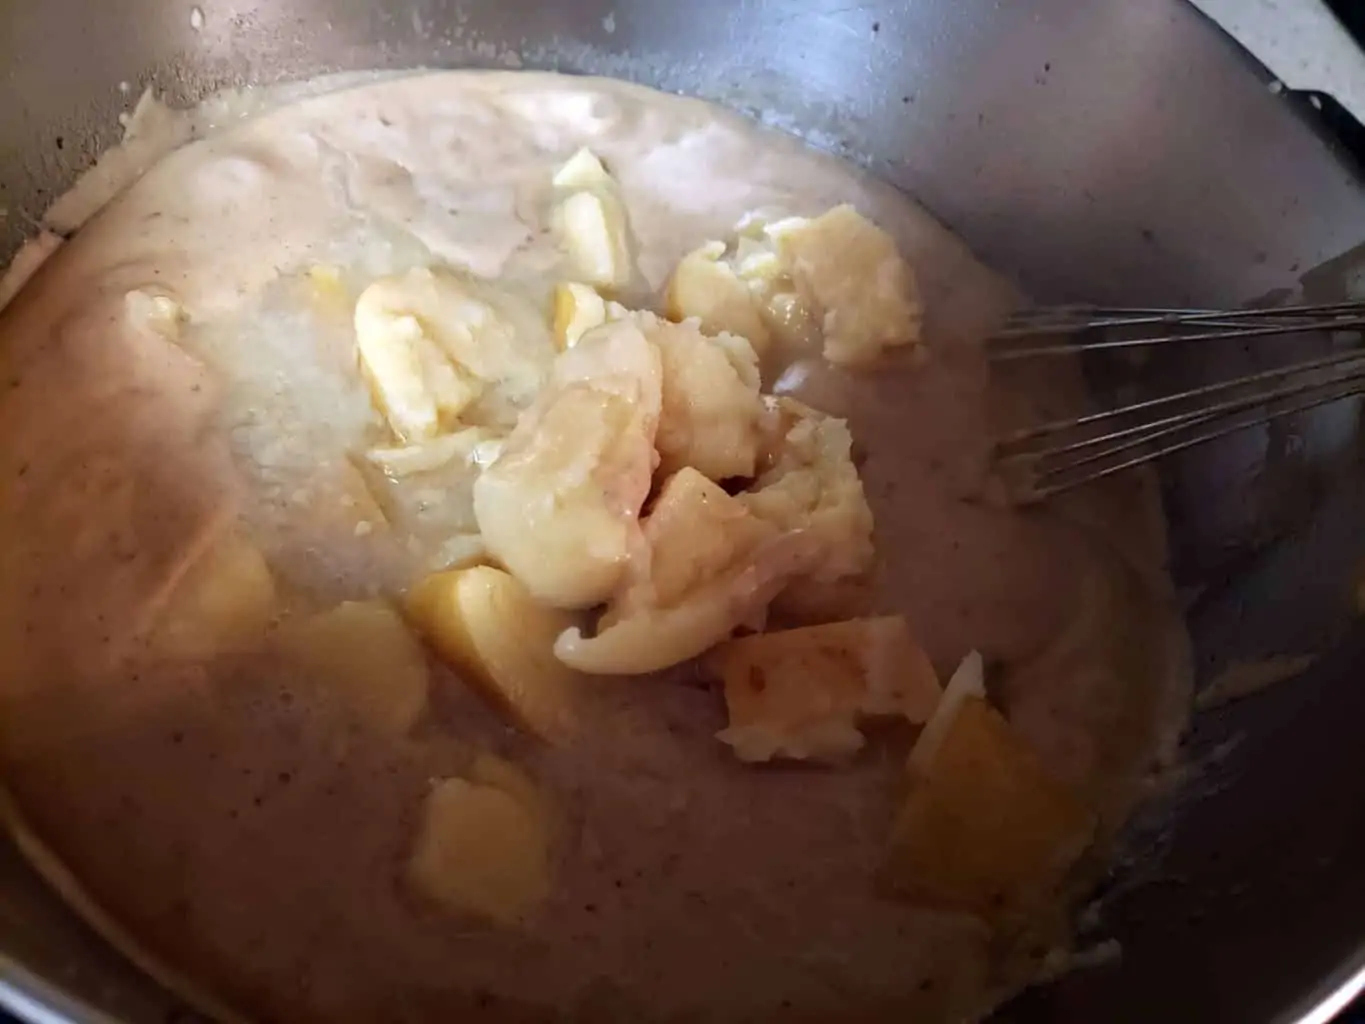 cubed potatoes added to Loaded Potato Soup base